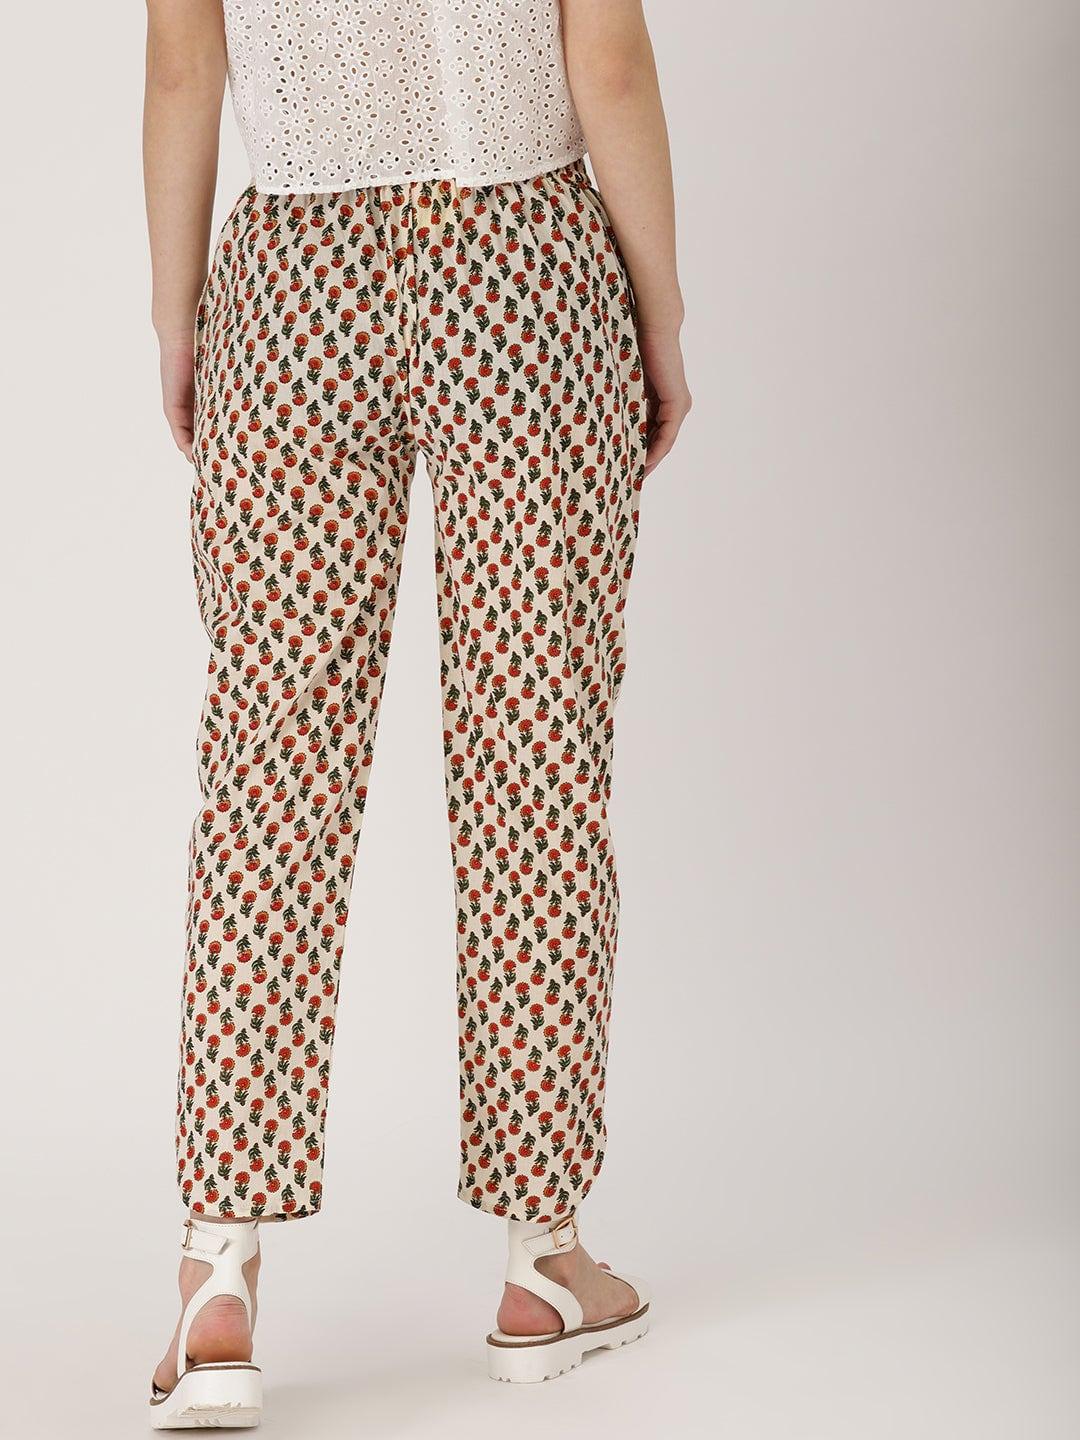 White Printed Cotton Trousers